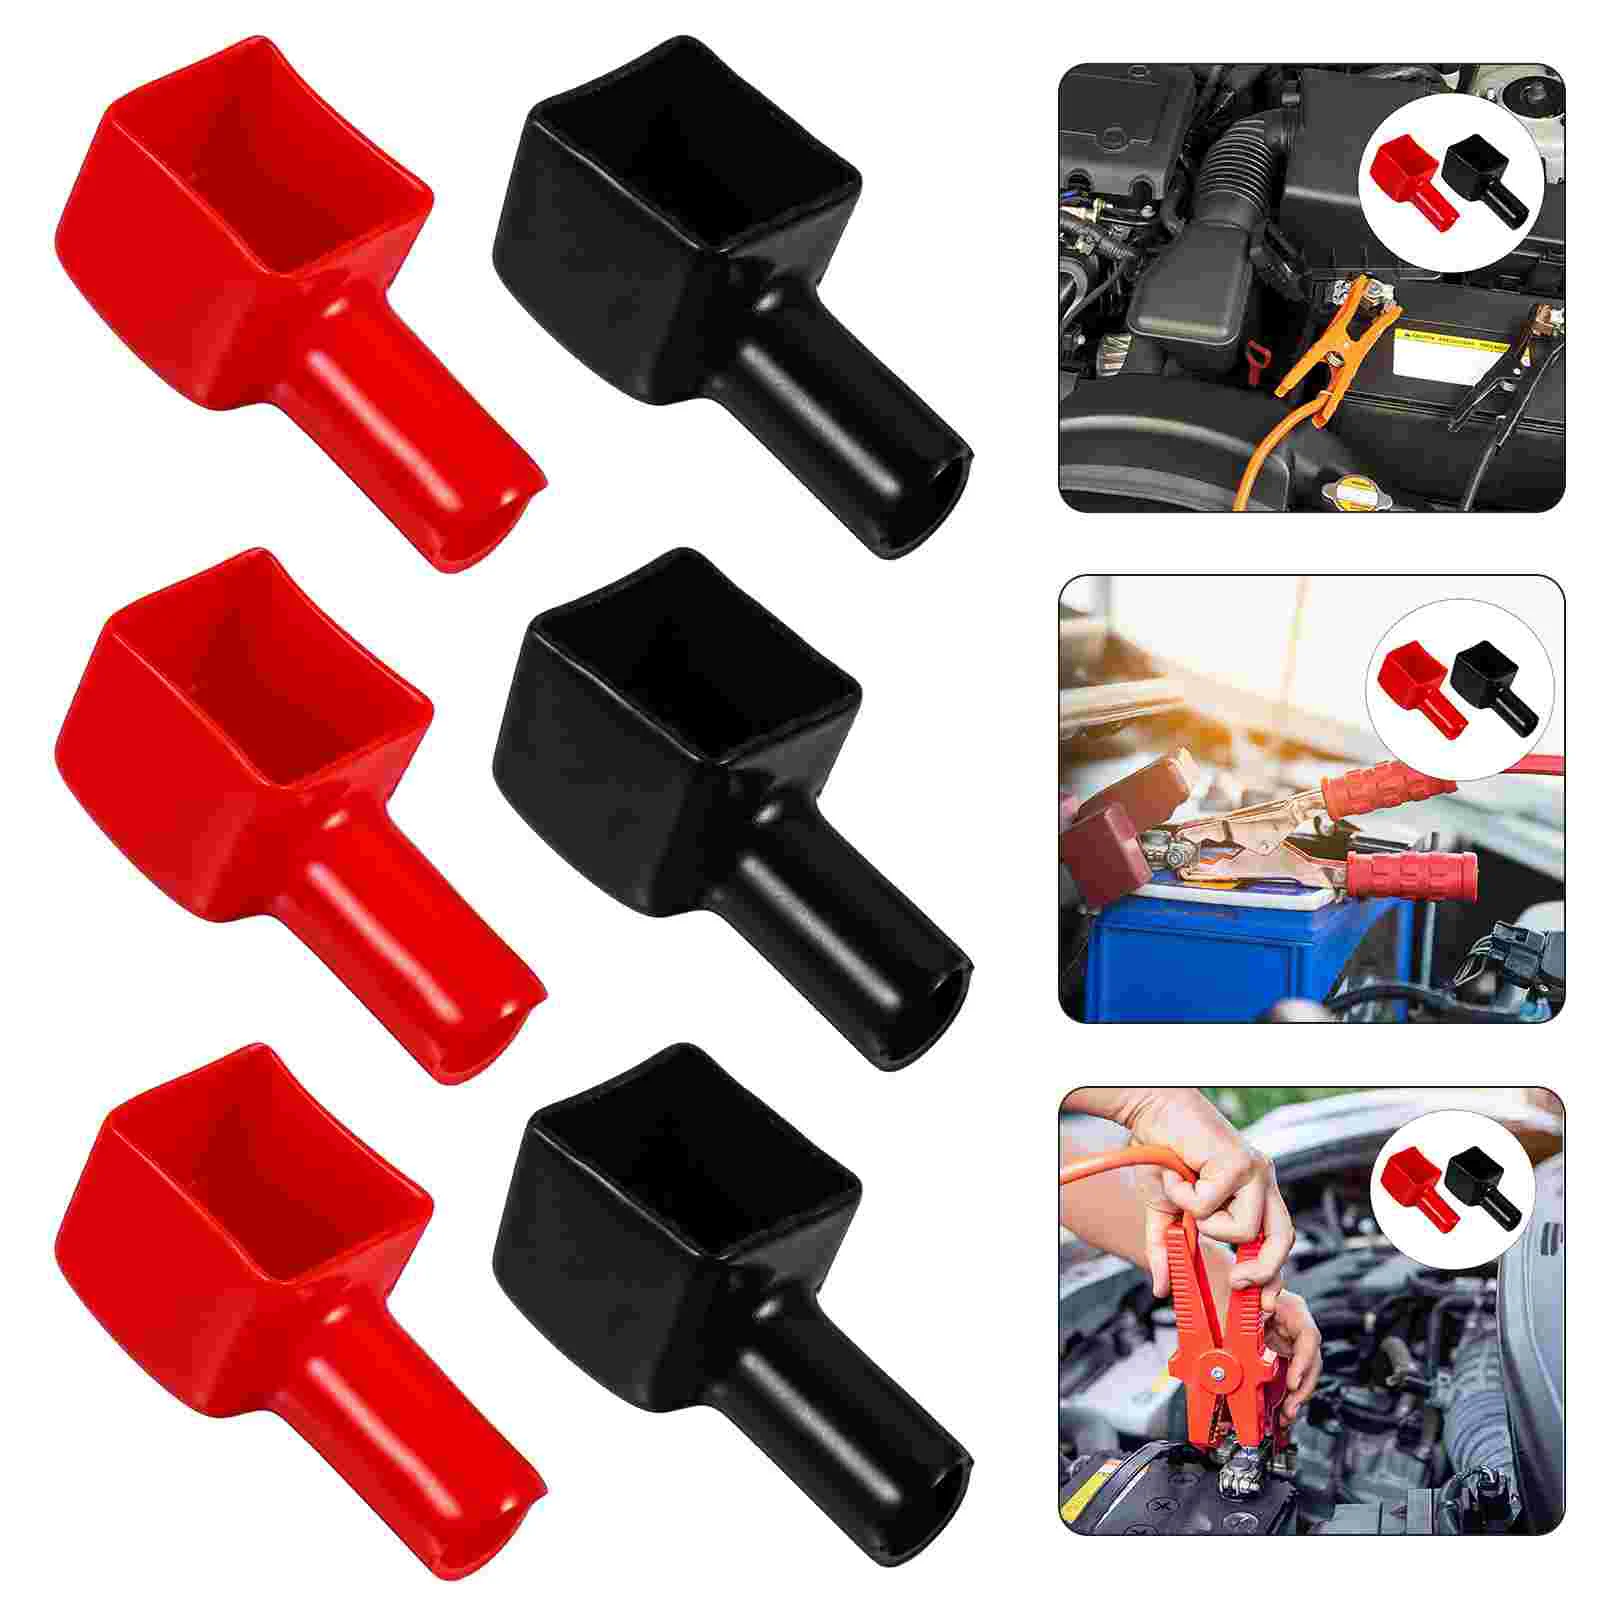 

6 Pcs Car Car Boat Accessories Pile Head Cover Terminal Caps for Covers Auto Protector Kit